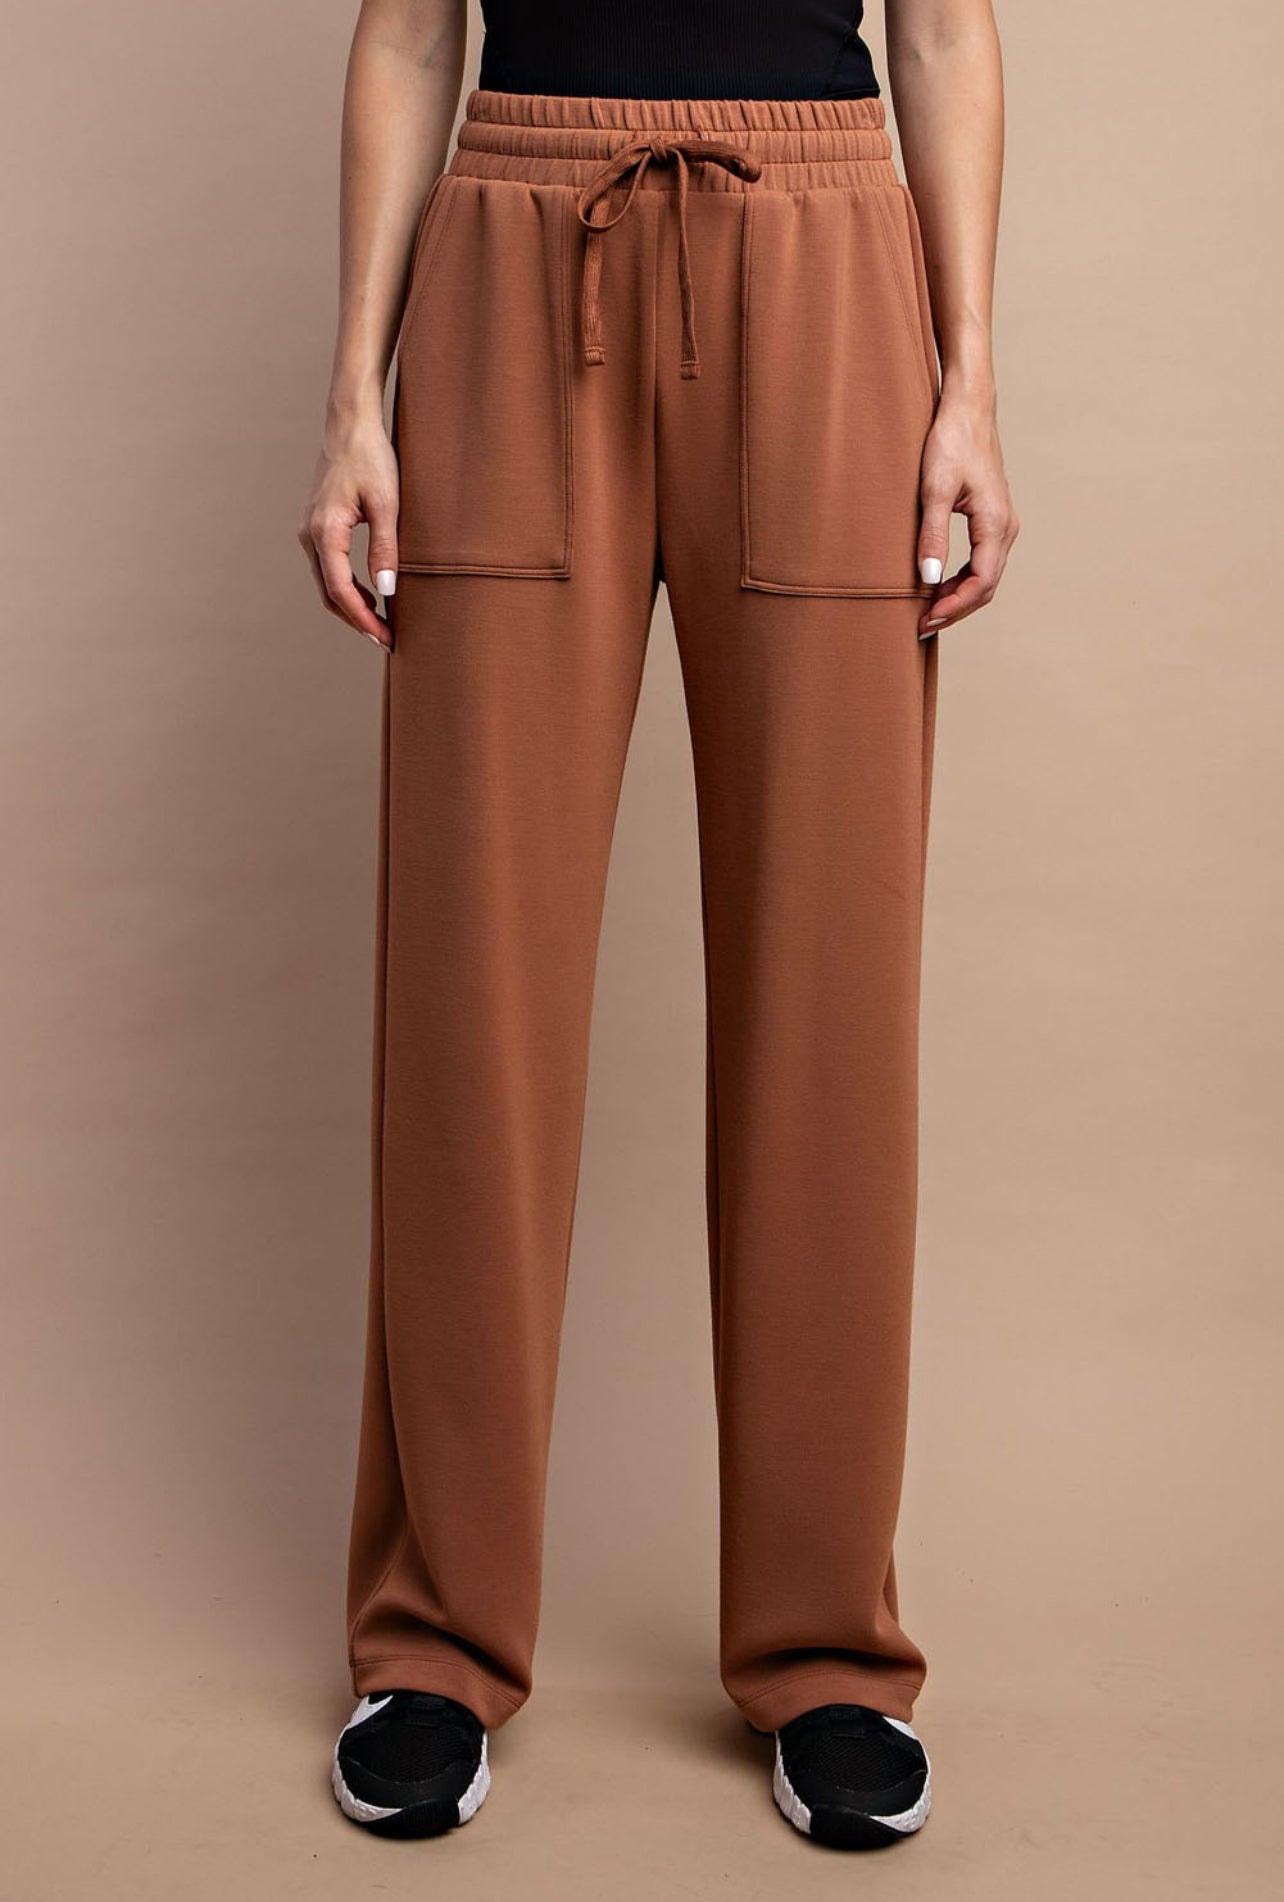 The Ultimate Lounge Pant In Camel